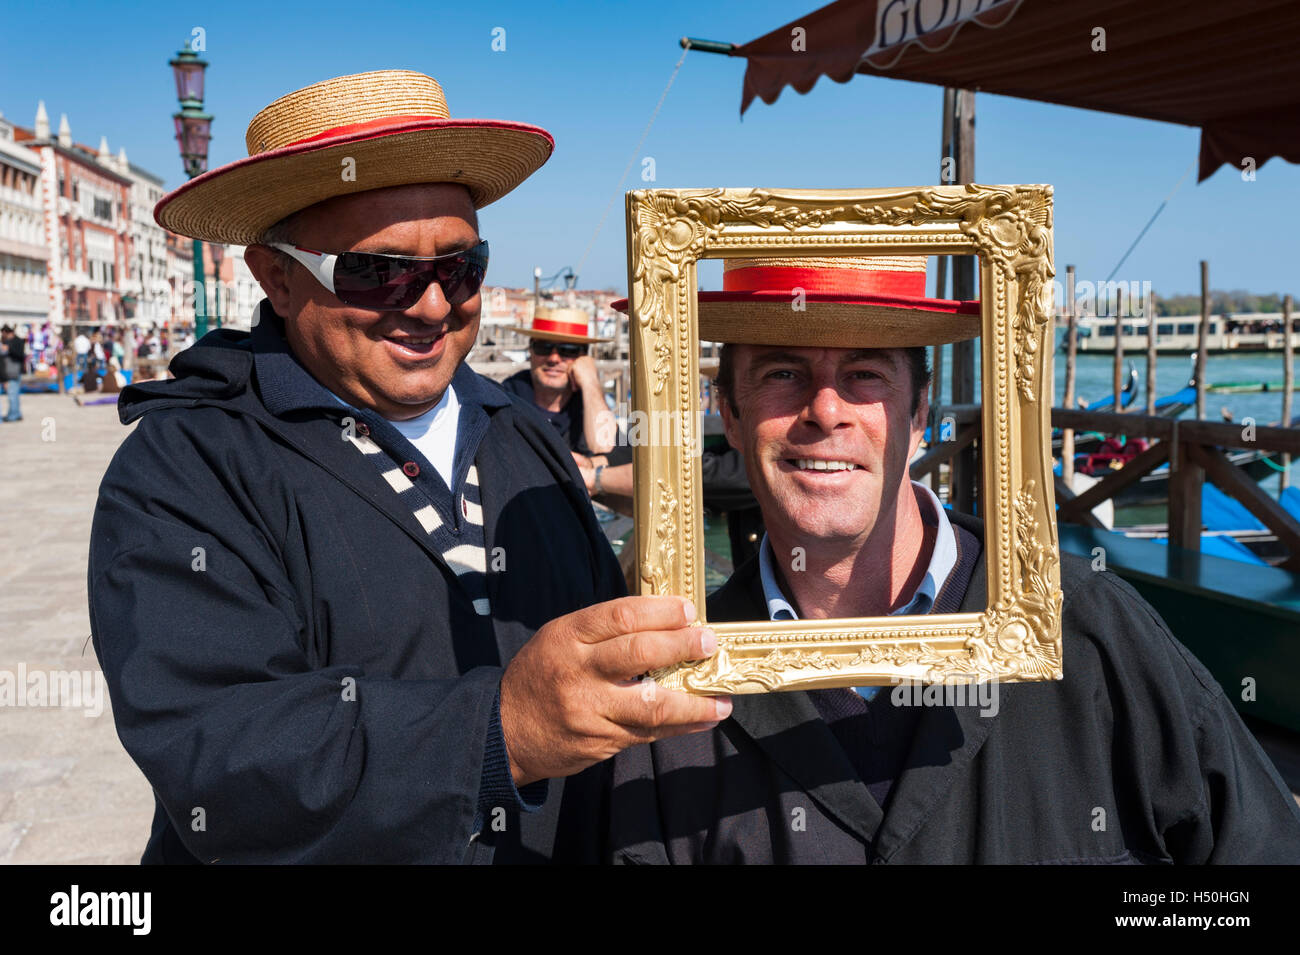 Two gondoliers having fun with picture frame in Venice Italy Stock Photo